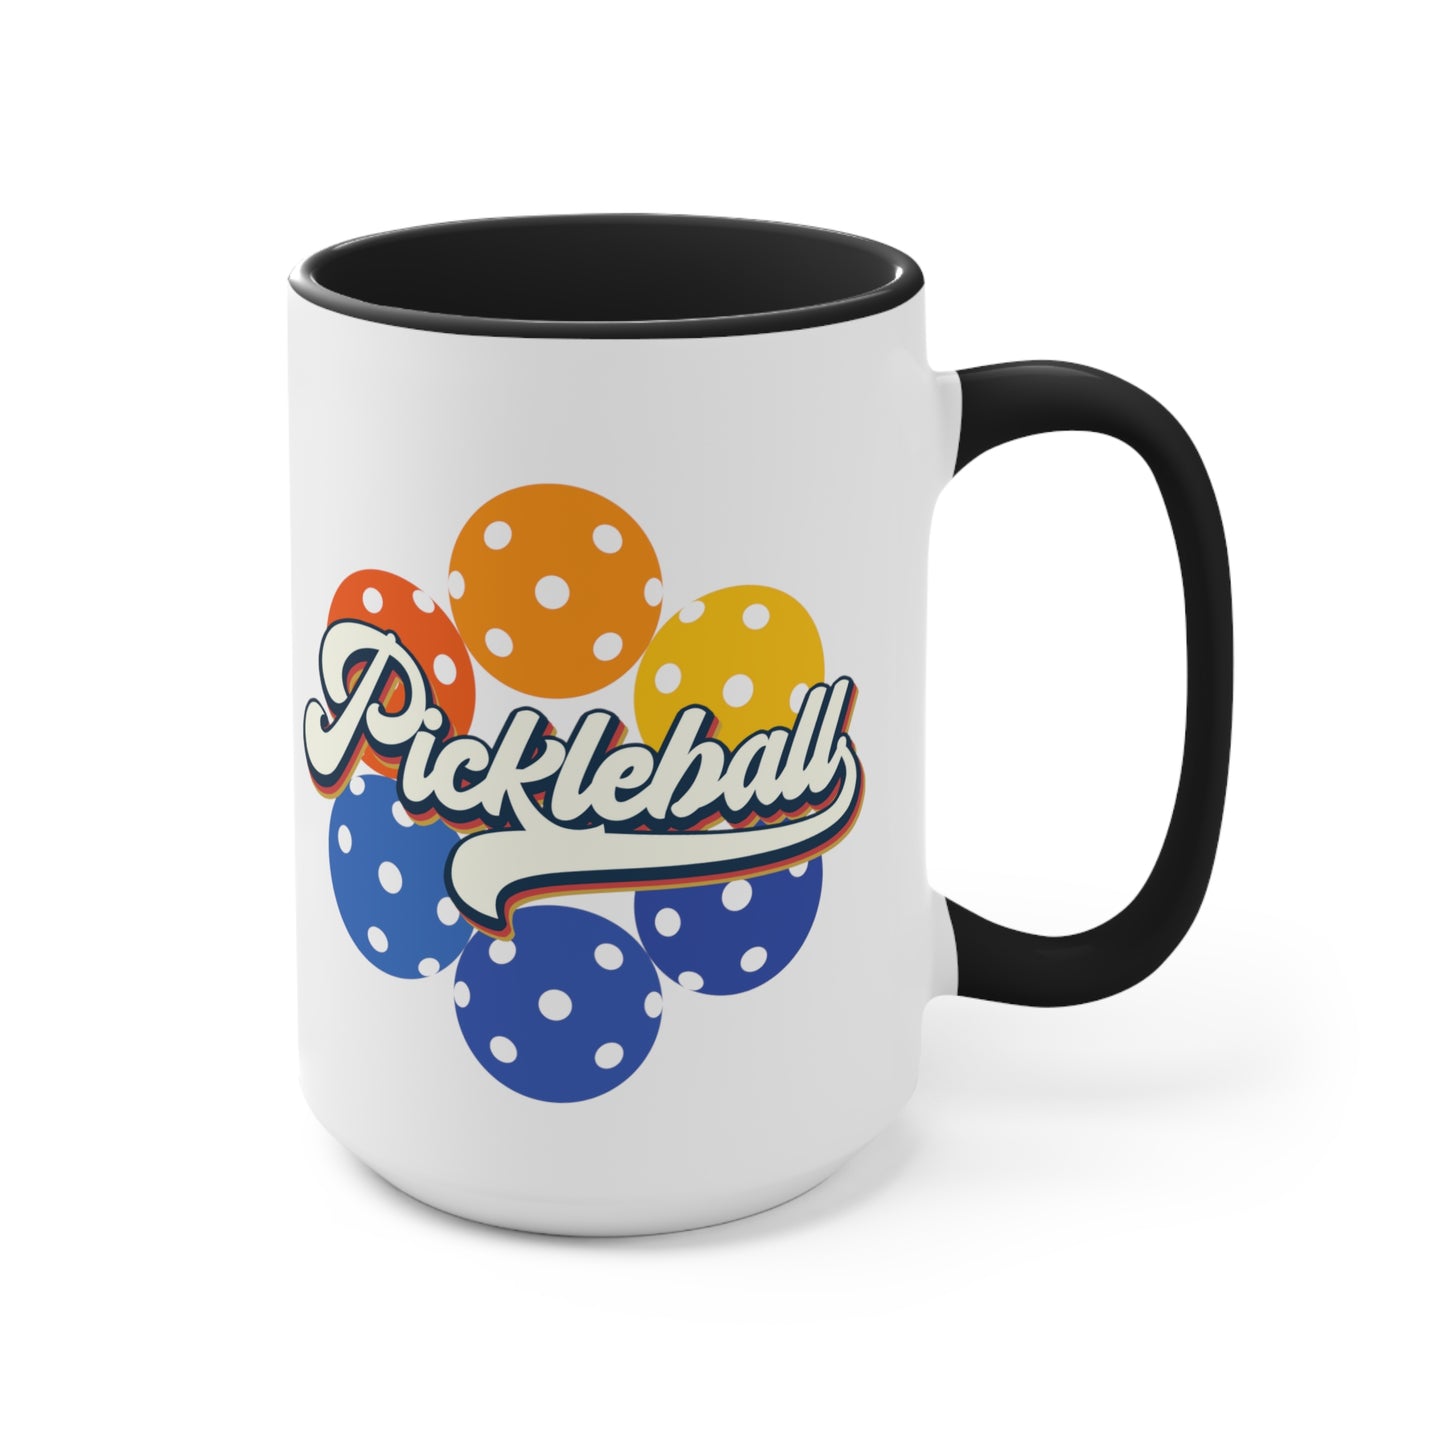 Colorful Pickleball Mug, Pickleball Mug, Pickleball Drink Cup, Gifts For Pickleball Lovers, Pickleball, Gift Ideas, Coffee Cup, Sports Mug